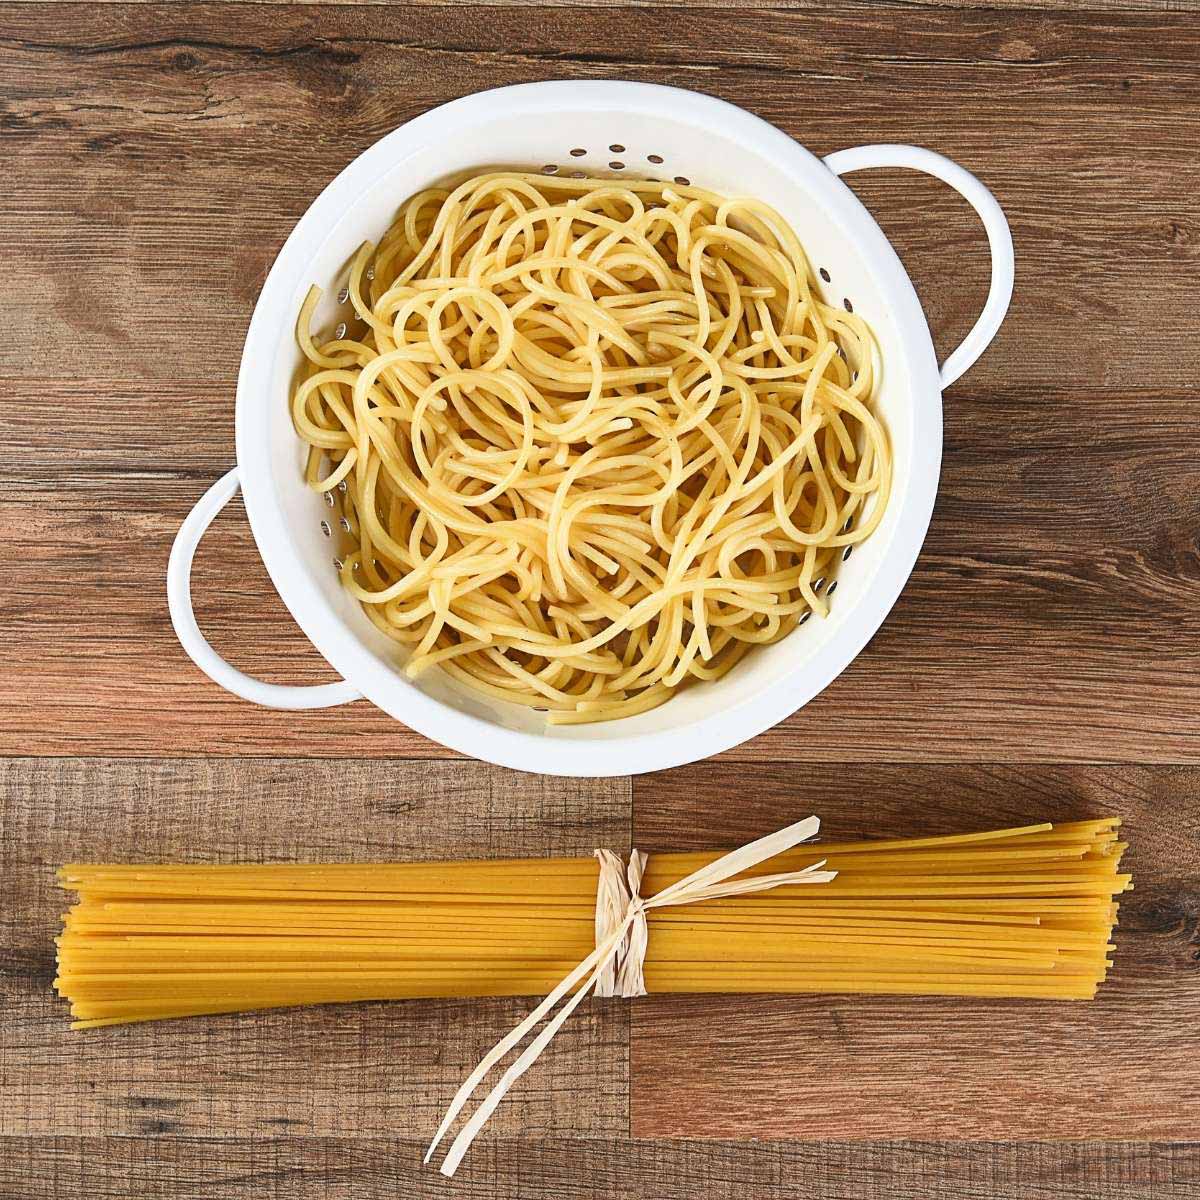 How To Store Spaghetti Noodles